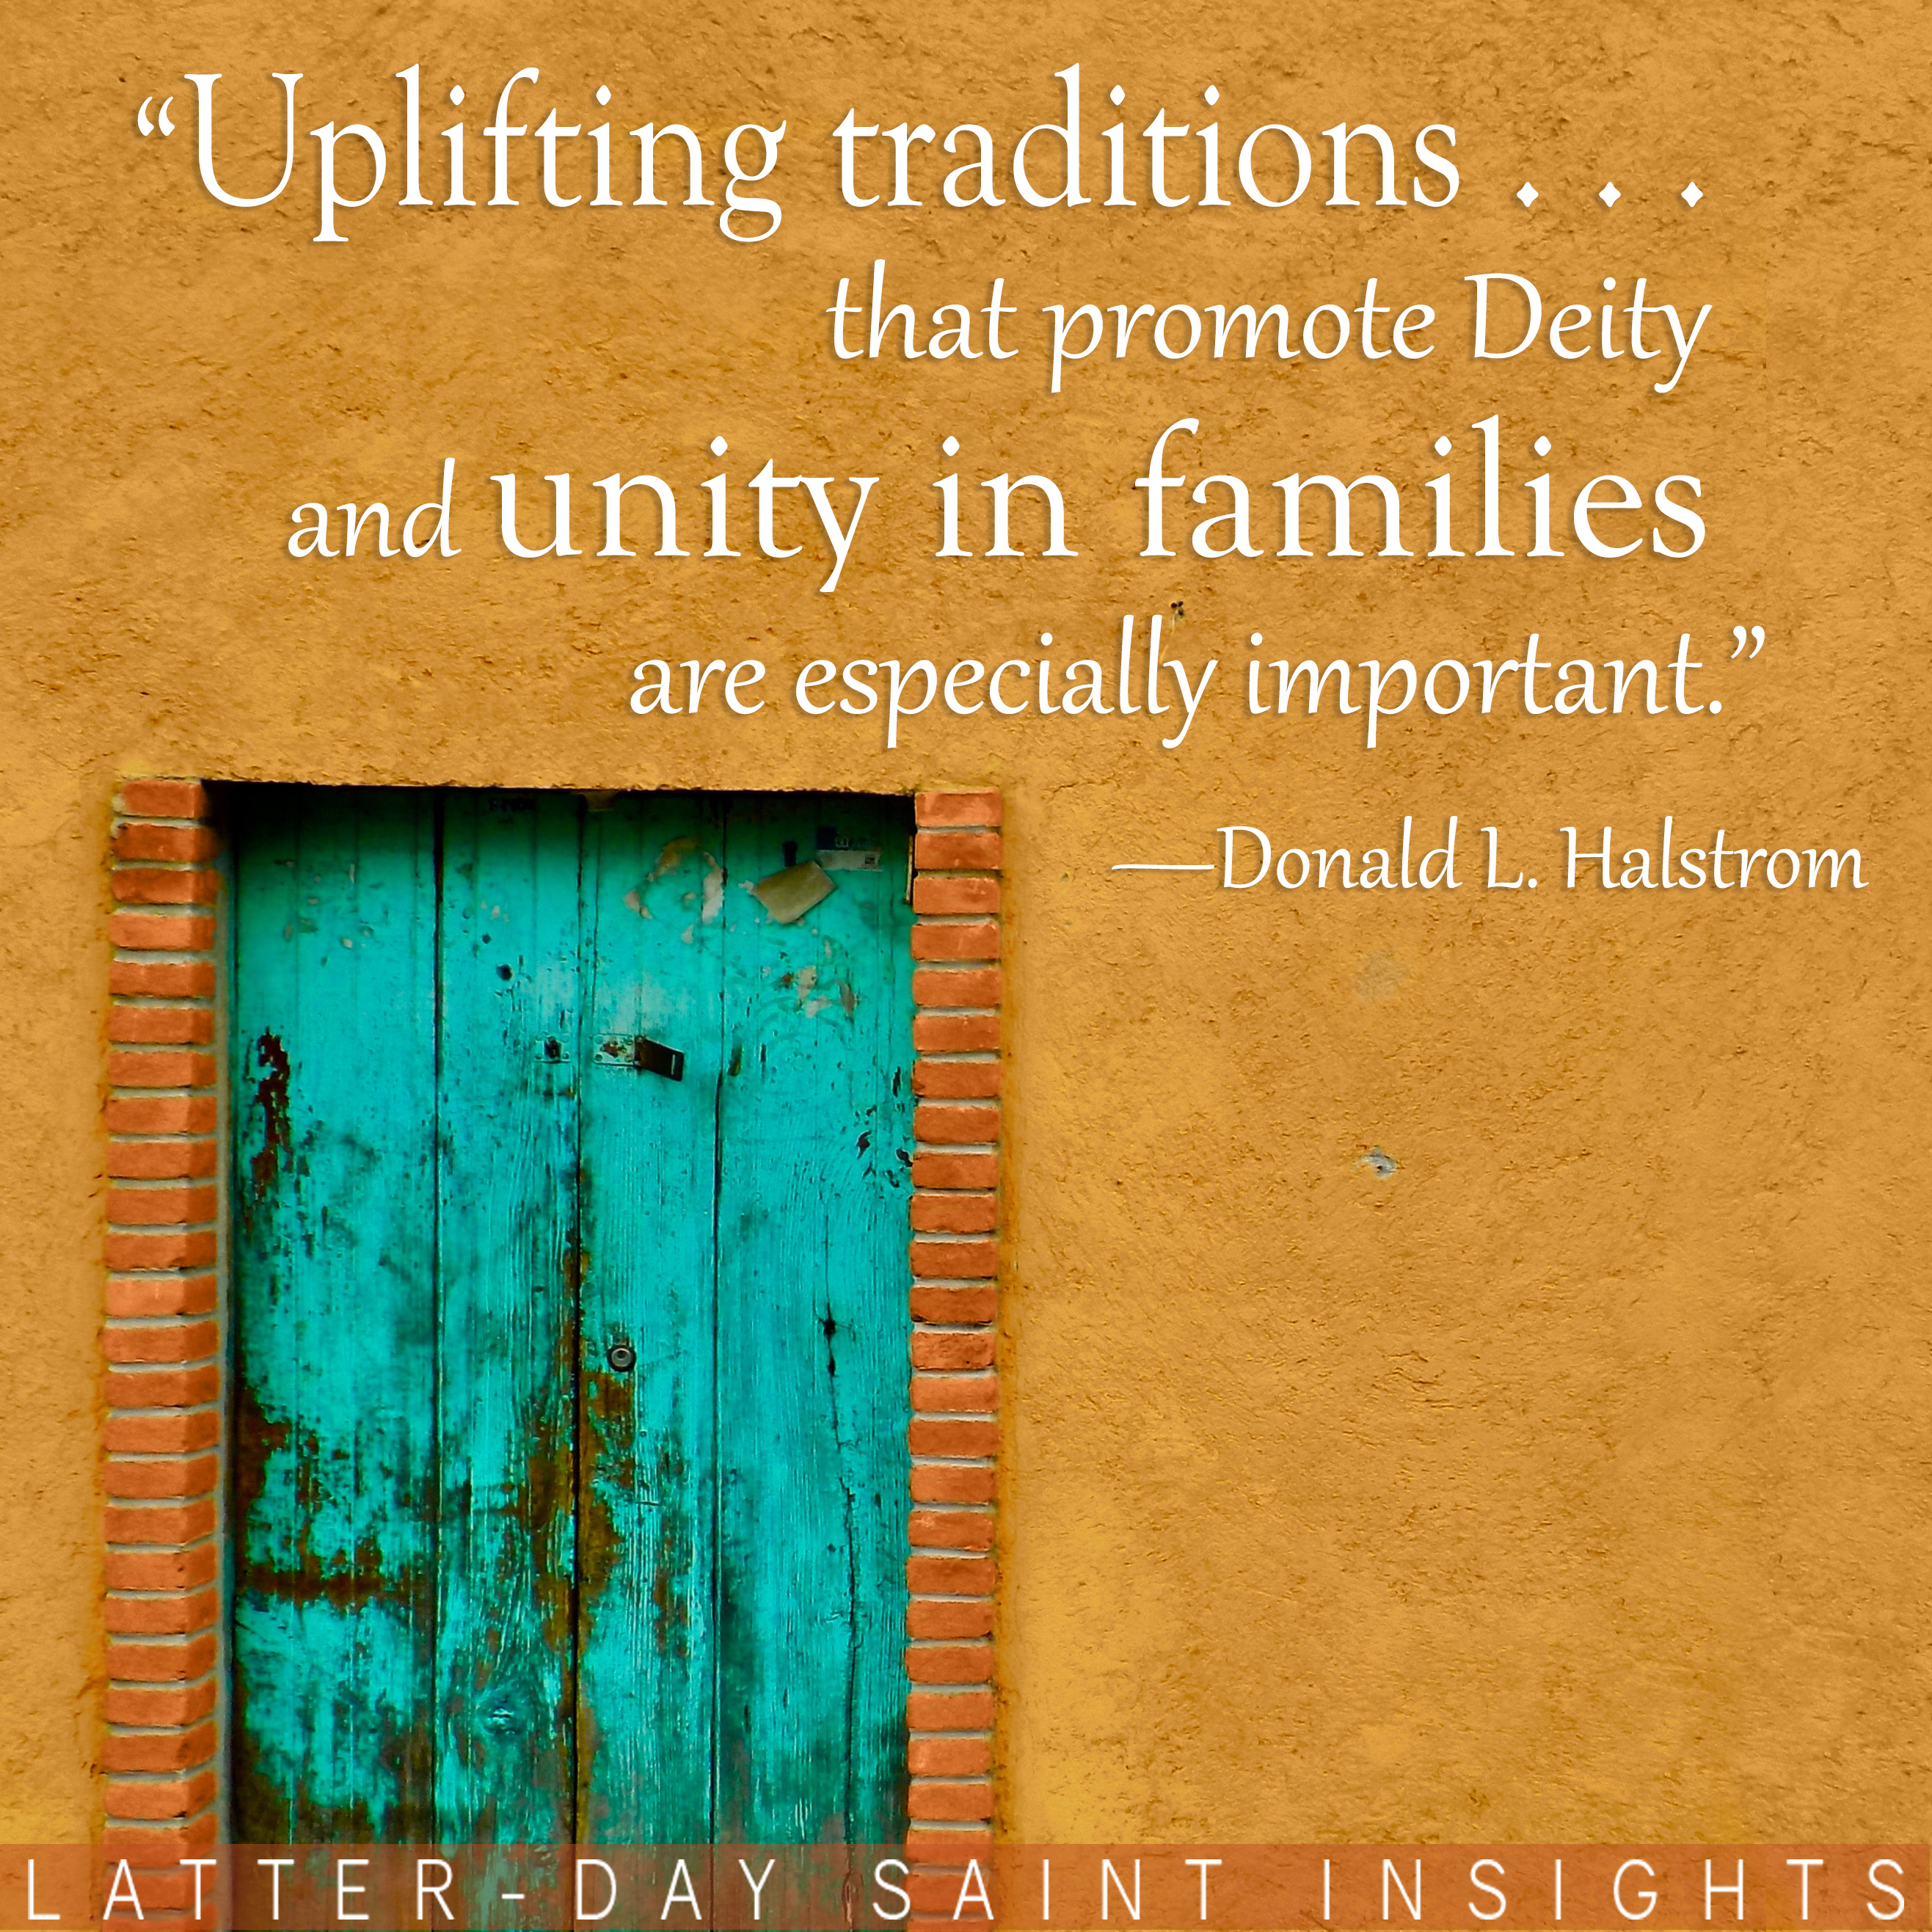 Bright yellow stucco wall with aquamarine wooden doorway with a quote by Donald L. Halstrom that says, "Uplifting traditions...that promote Deity and unity in families are especially important."